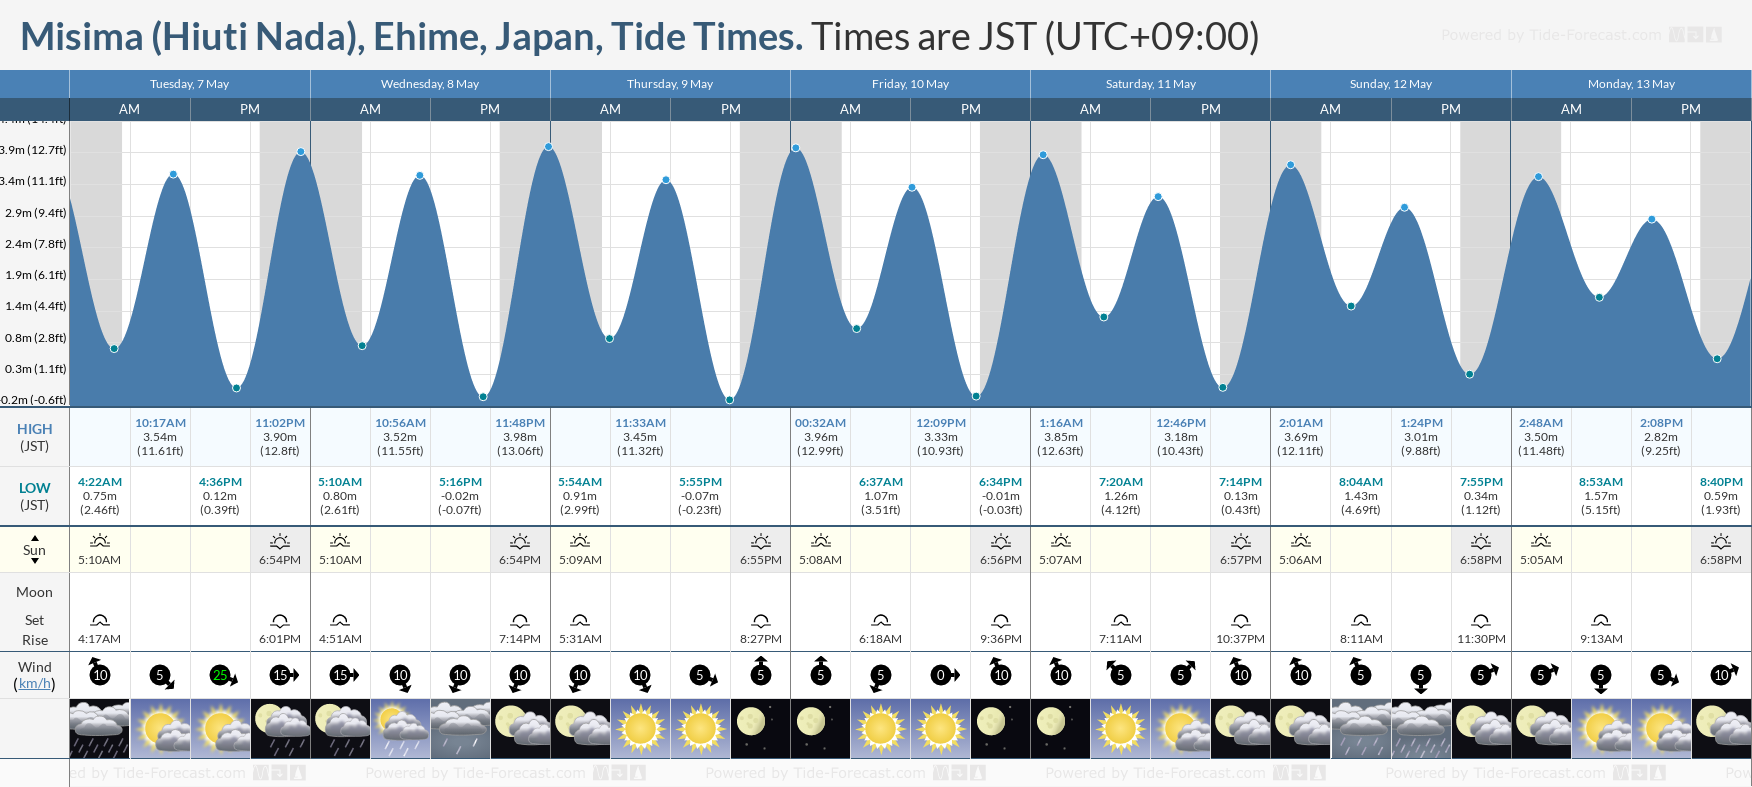 Misima (Hiuti Nada), Ehime, Japan Tide Chart including high and low tide tide times for the next 7 days